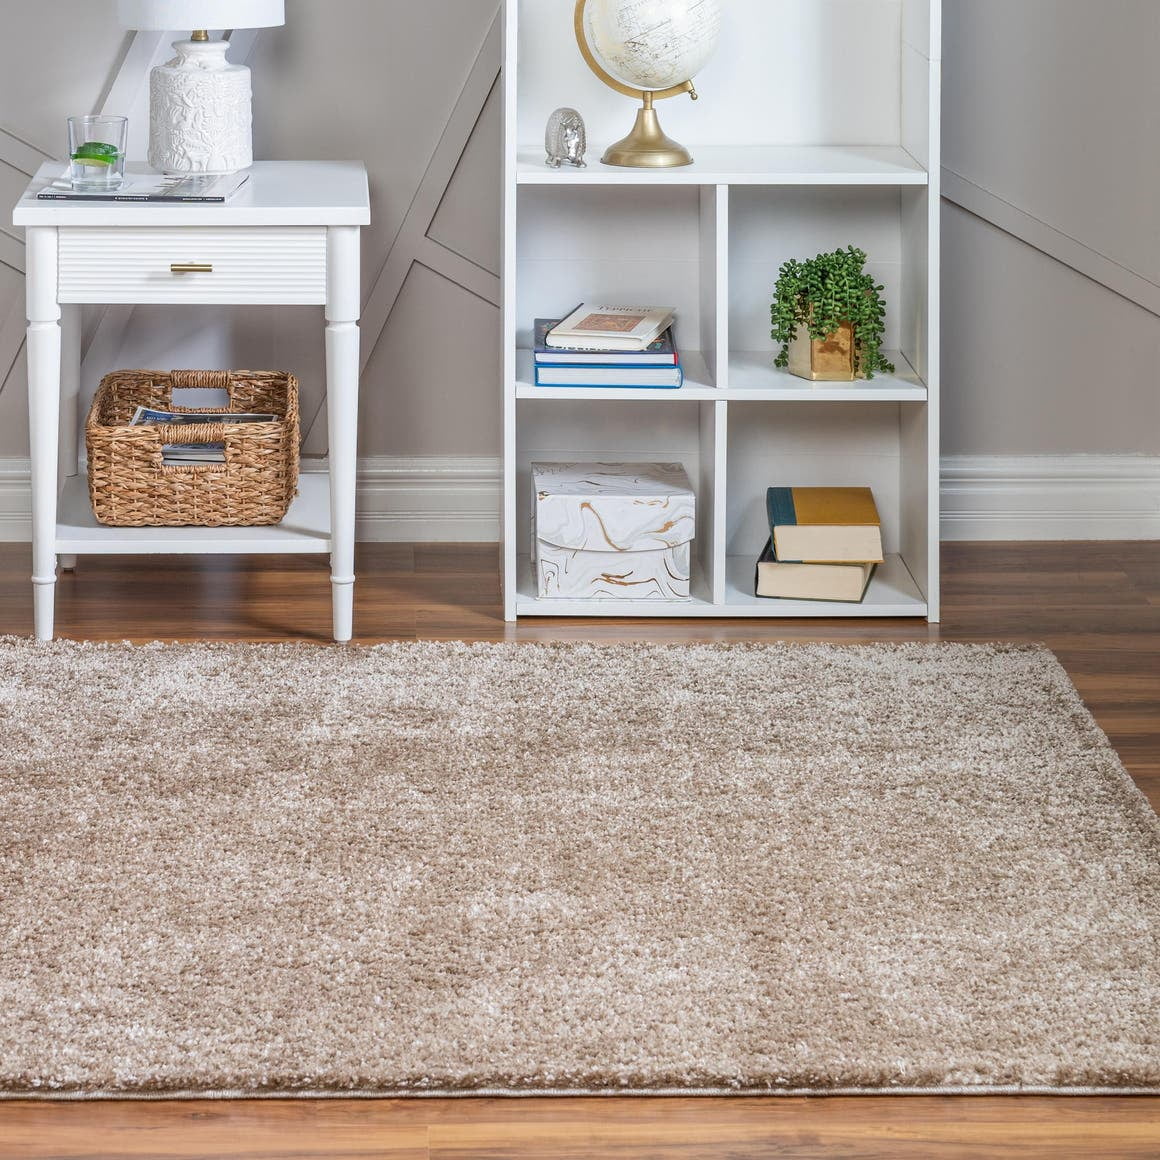 Distressed Beige Striped Hallway Shaggy Runners Non Shed Long Narrow Runner Rugs 